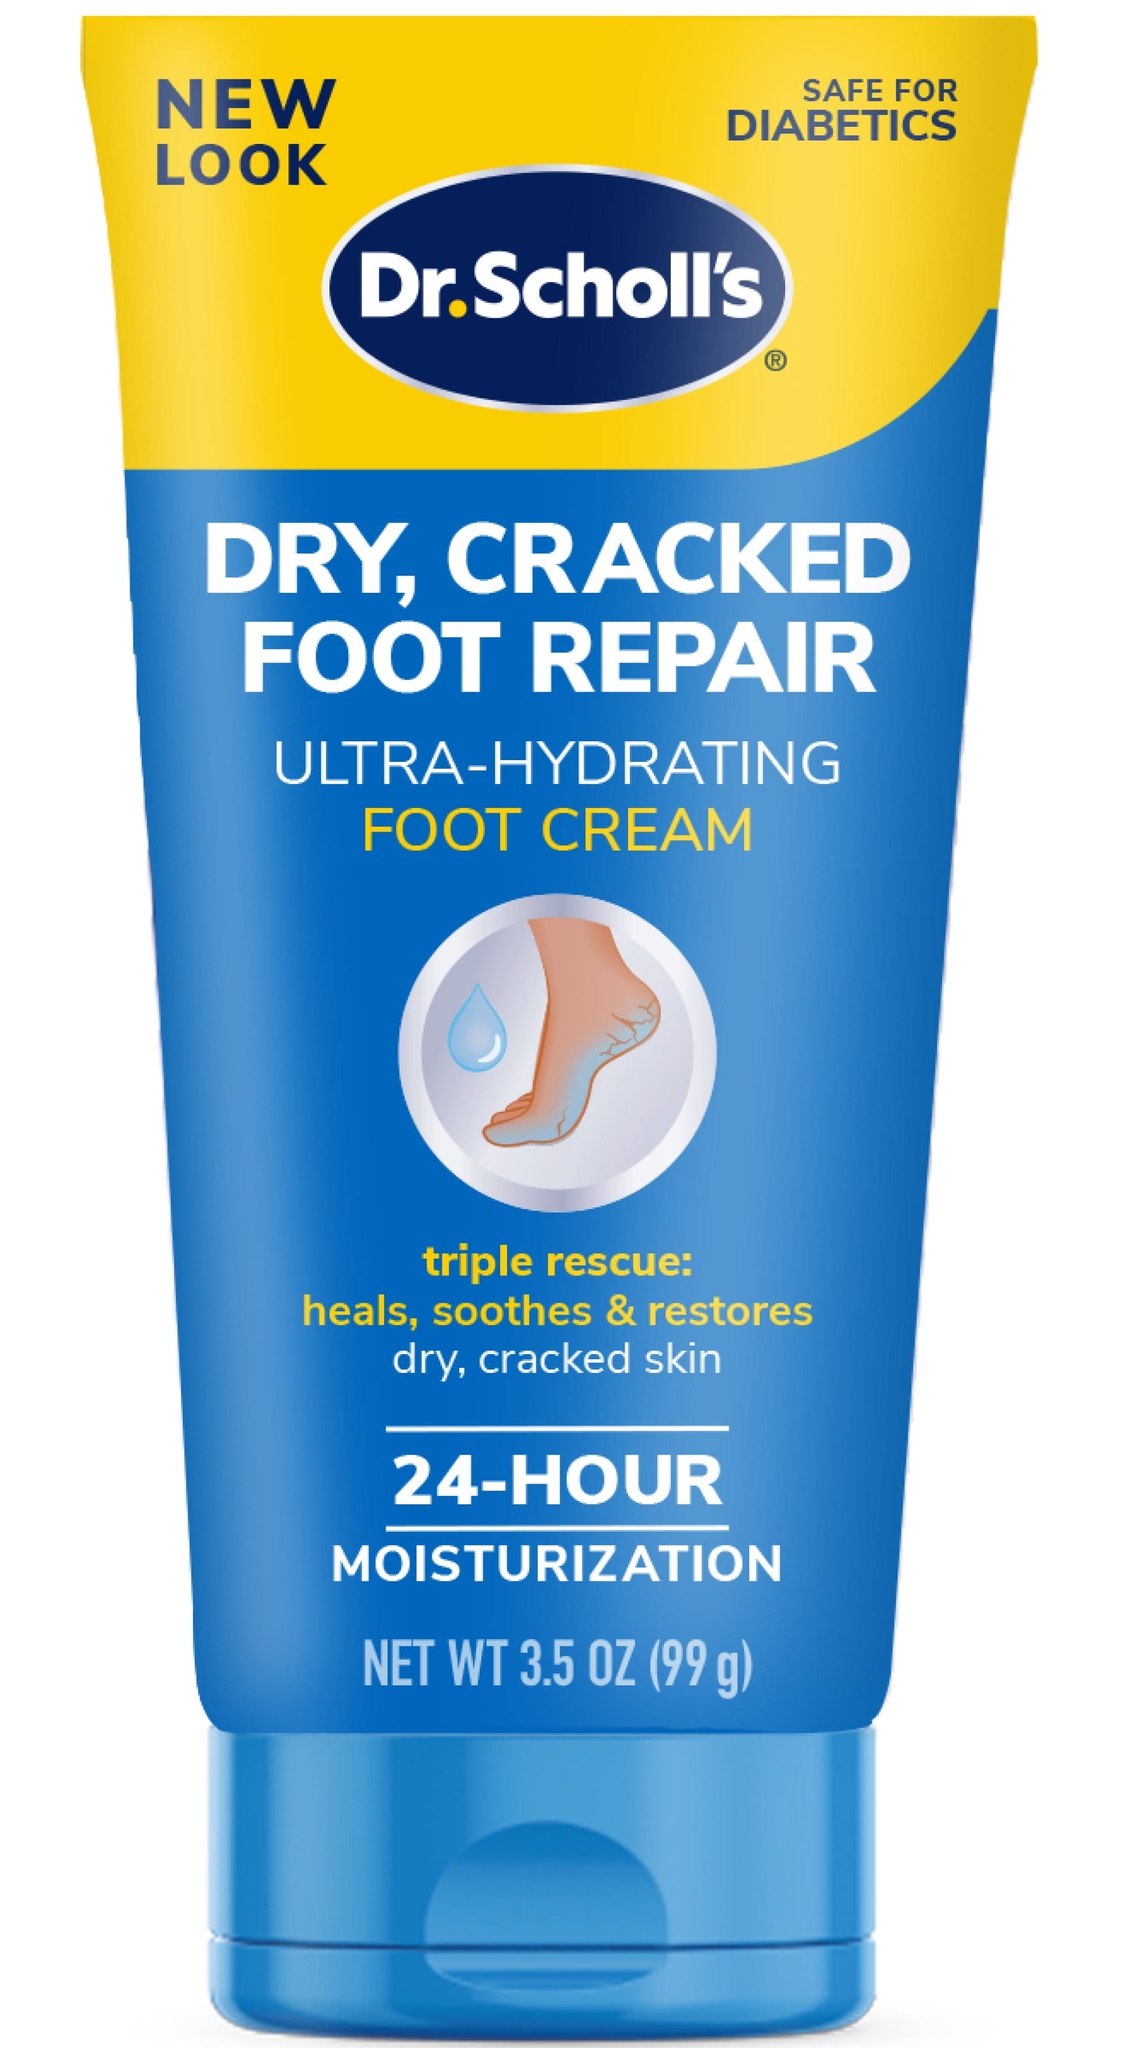 Dr. Scholl's Dry, Cracked Foot Repair Ultra-hydrating Foot Cream